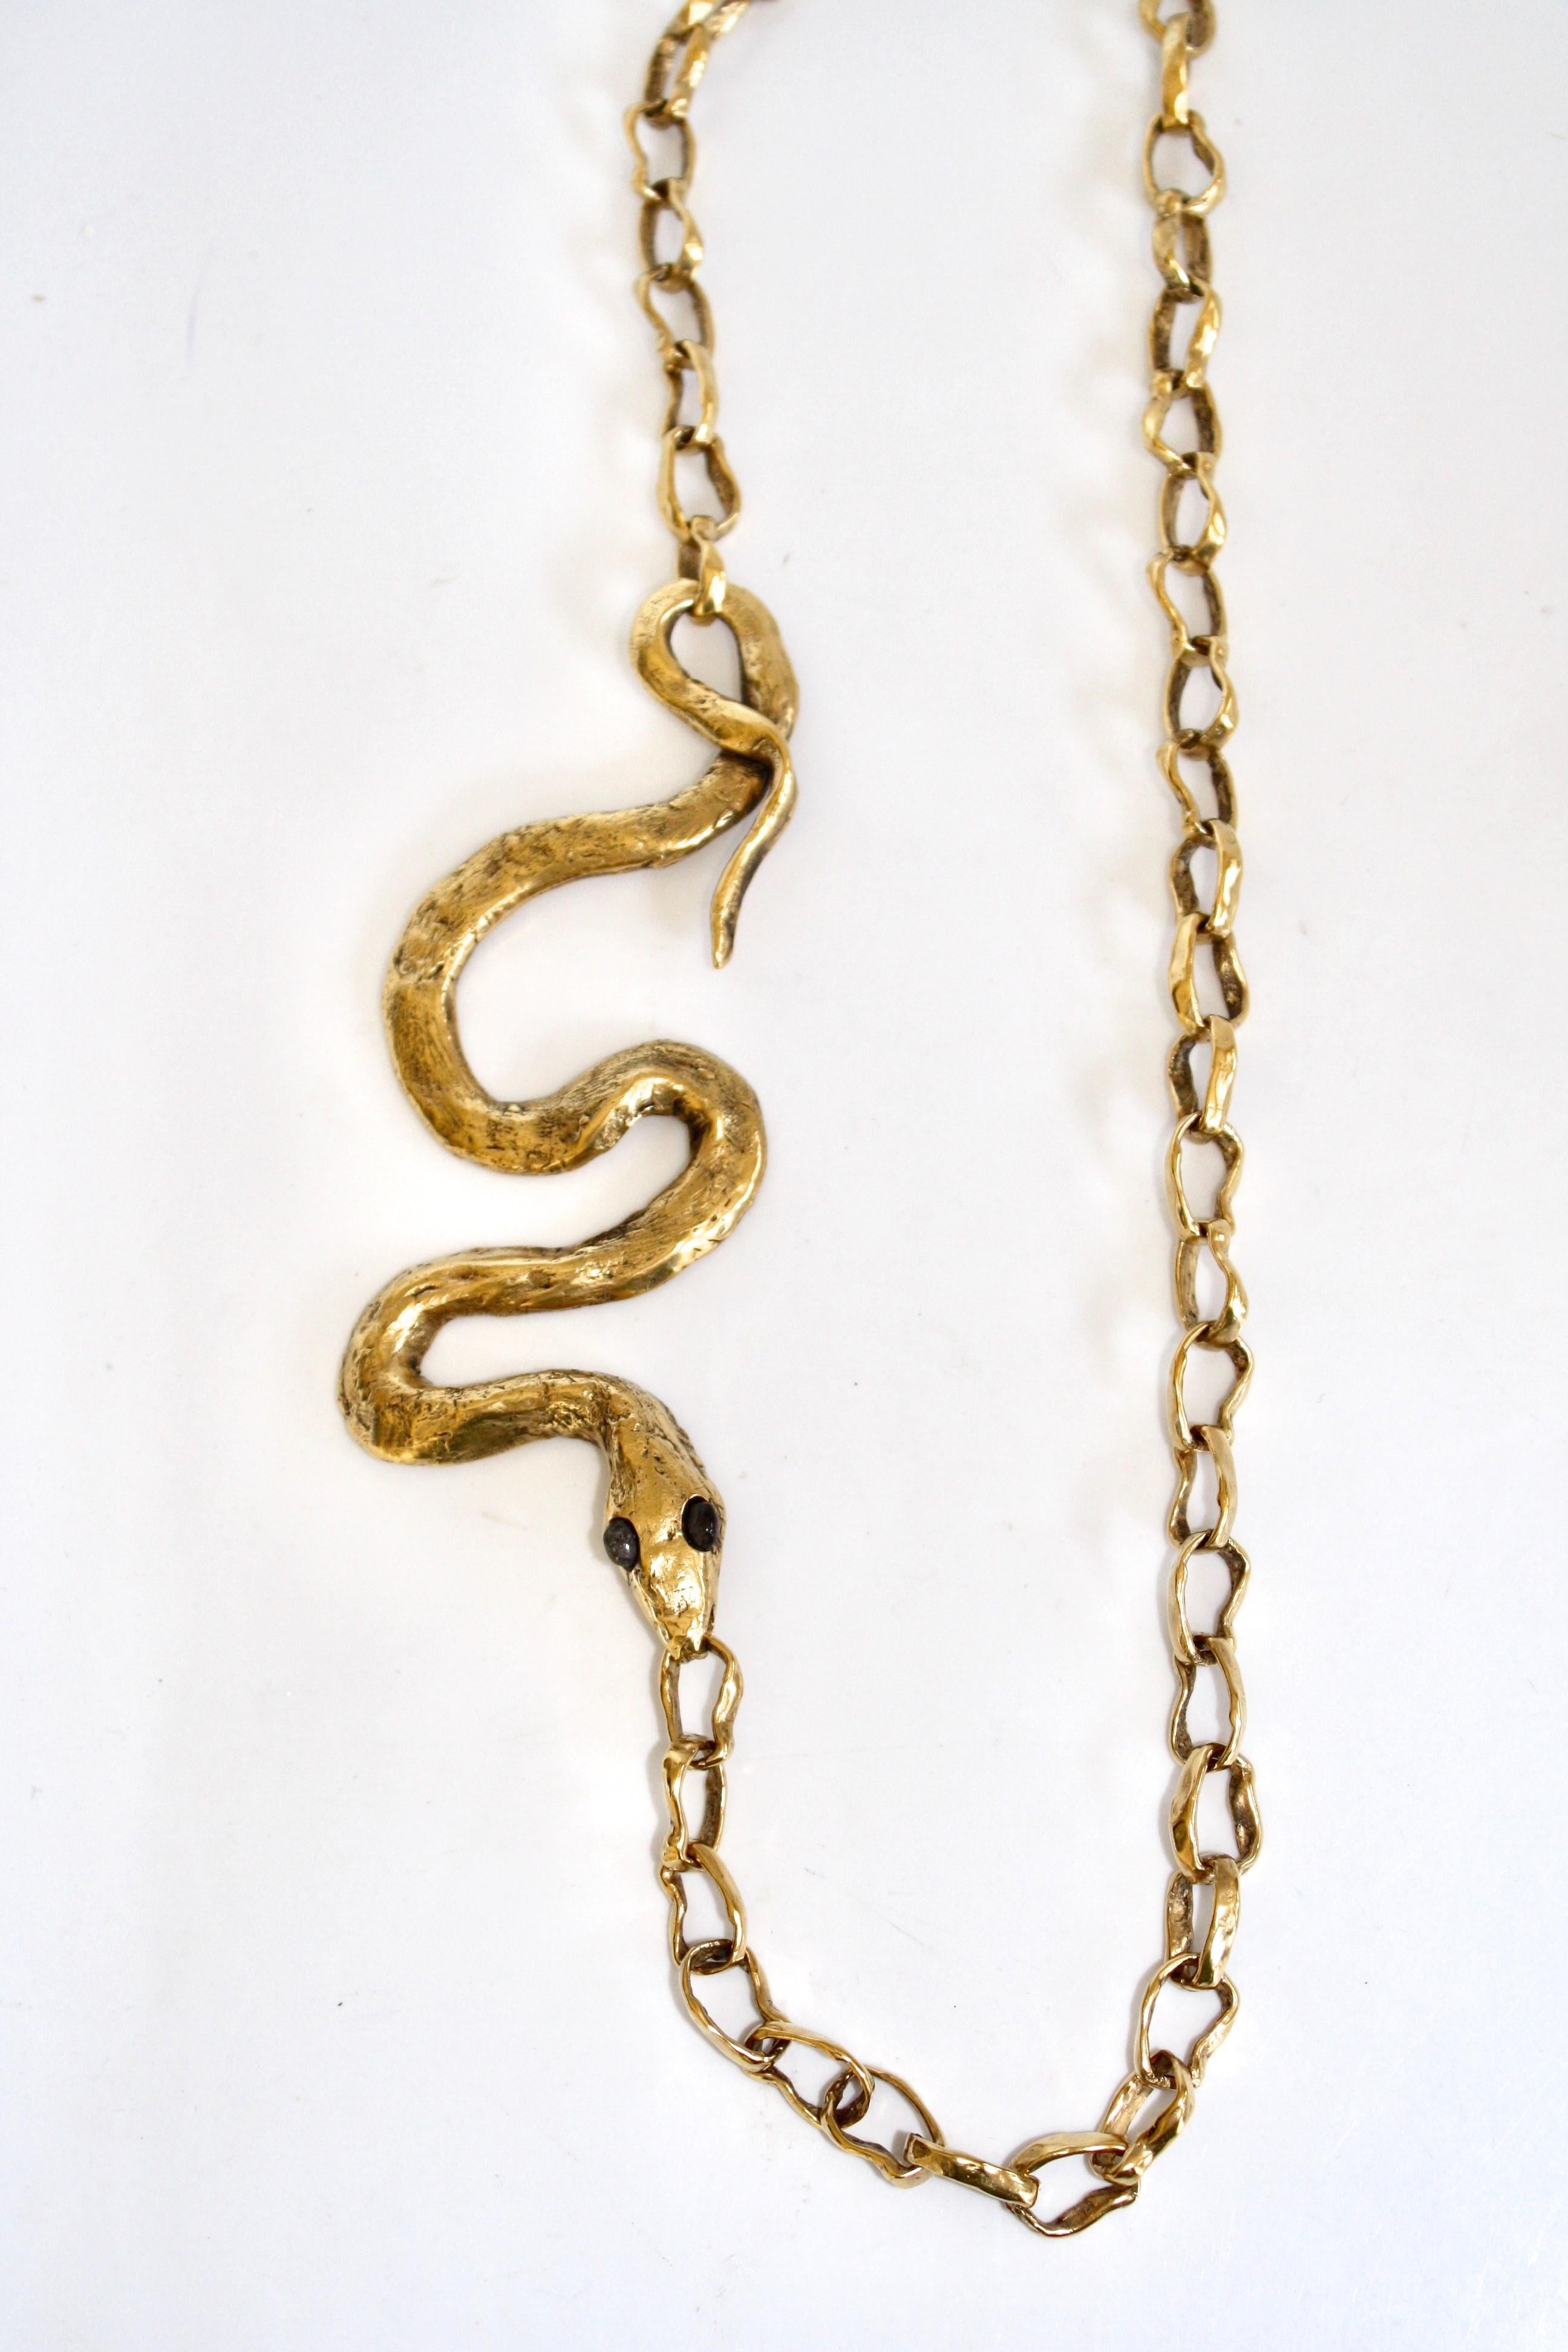 Snake motif on chain necklace. This necklace is part of a limited edition collaboration between Harumi Klossowska de Rola and the House of Goossens Paris. The chain is 28” long and the snake is 5”. 

The NY Times recently wrote an article entitled